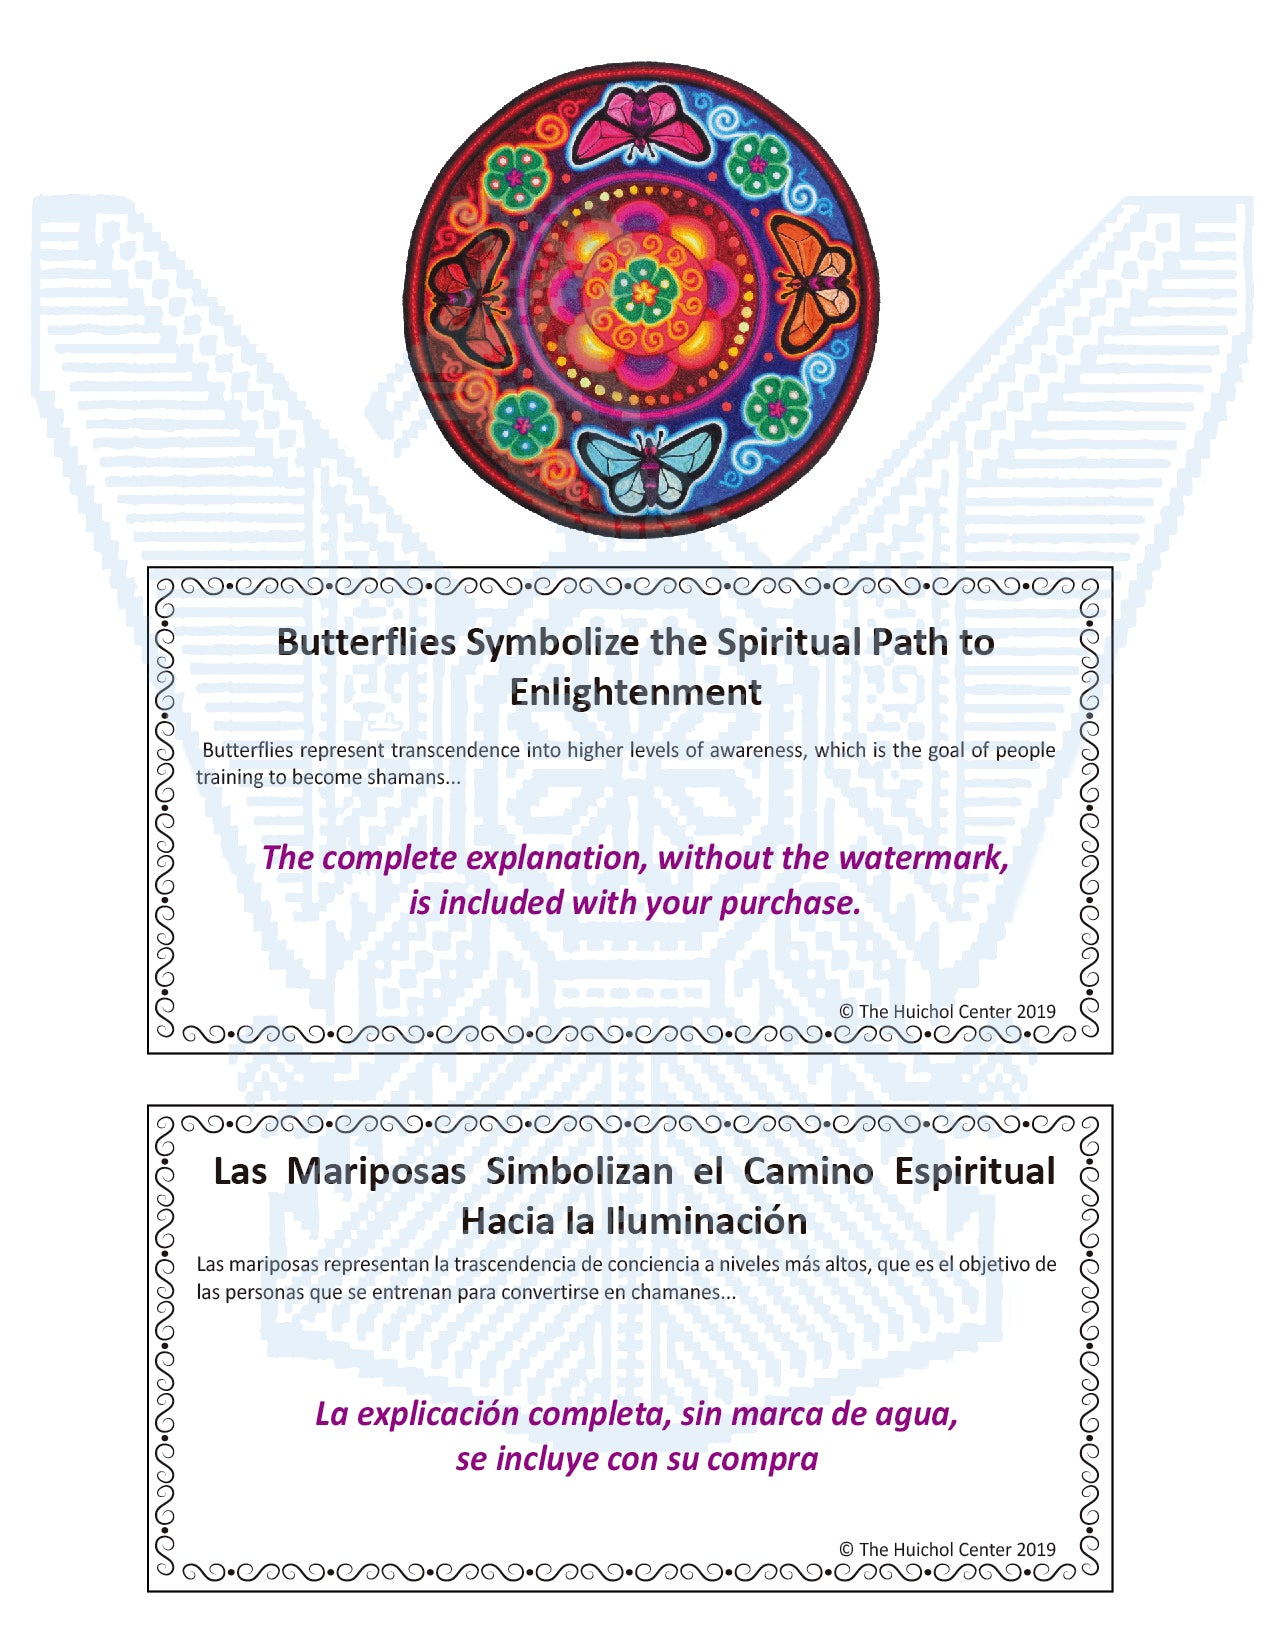 Butterflies Symbolize the Spiritual Path to Enlightment